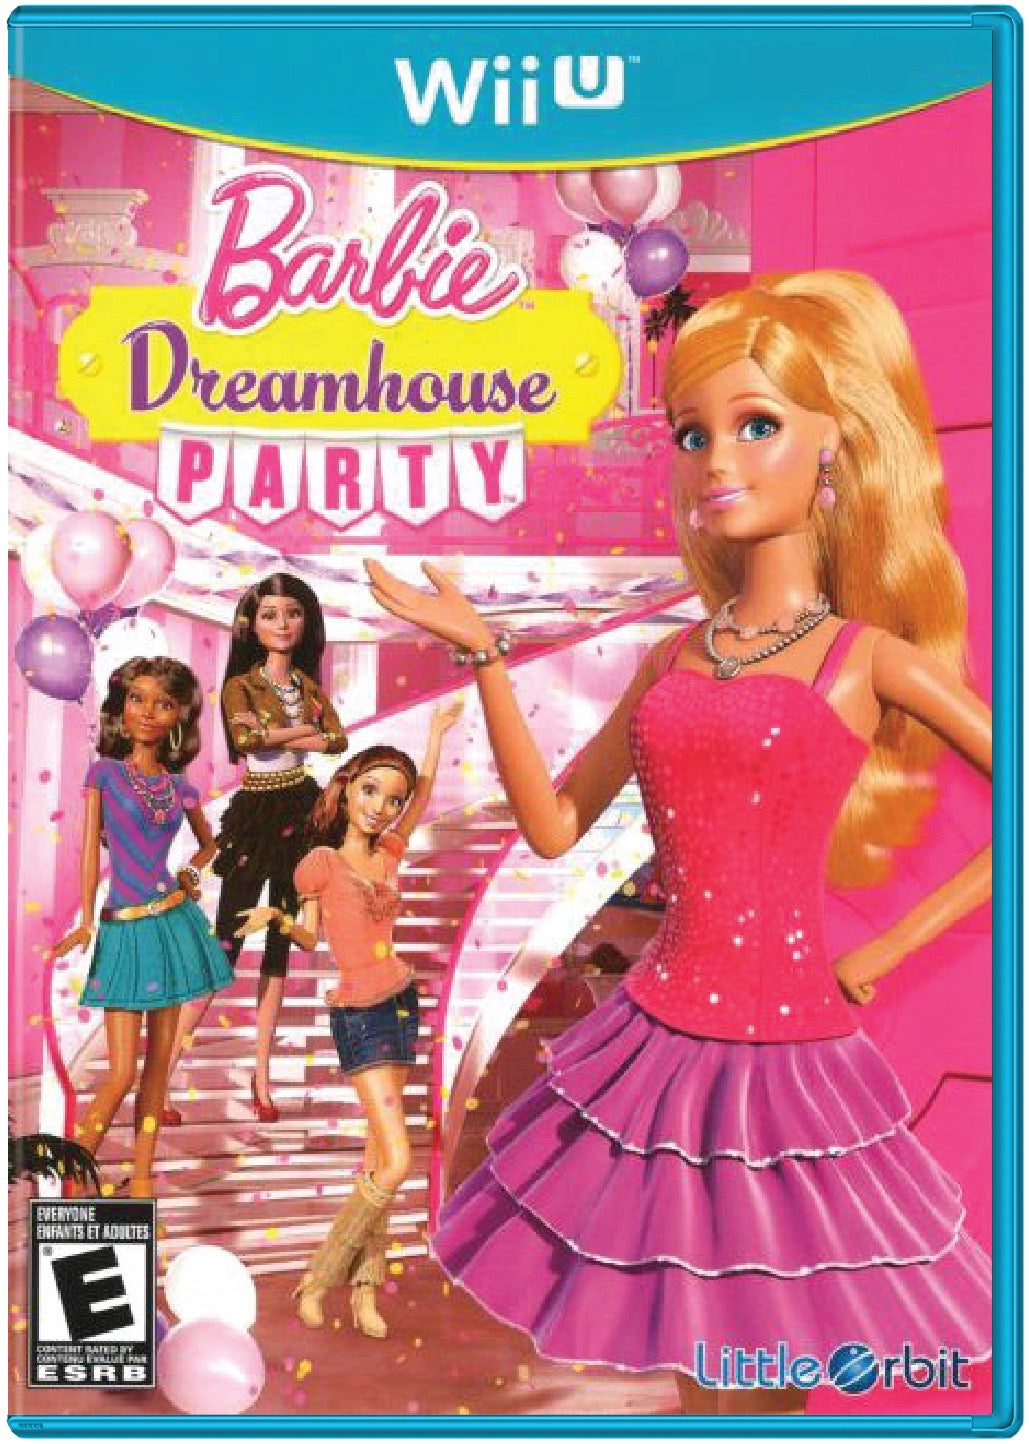 Barbie Dreamhouse Party Cover Art and Product Photo